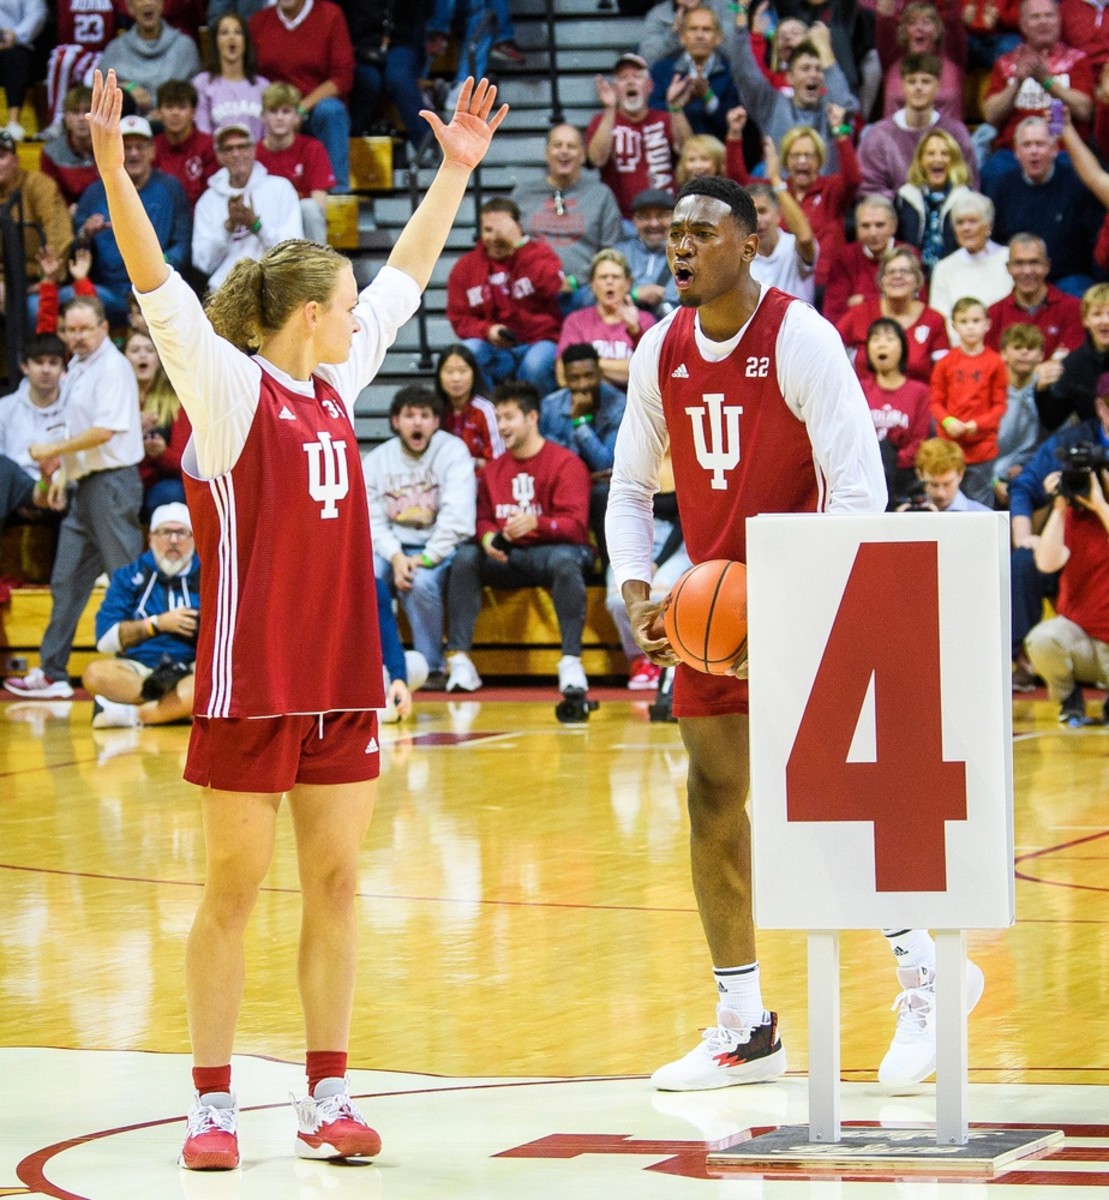 Indiana's Grace Berger and Jordan Geronimo celebrate her make of the half-court shot in the skills contest during Hoosier Hysteria for the basketball programs at Simon Skjodt Assembly Hall on Friday, Oct. 7, 2022.